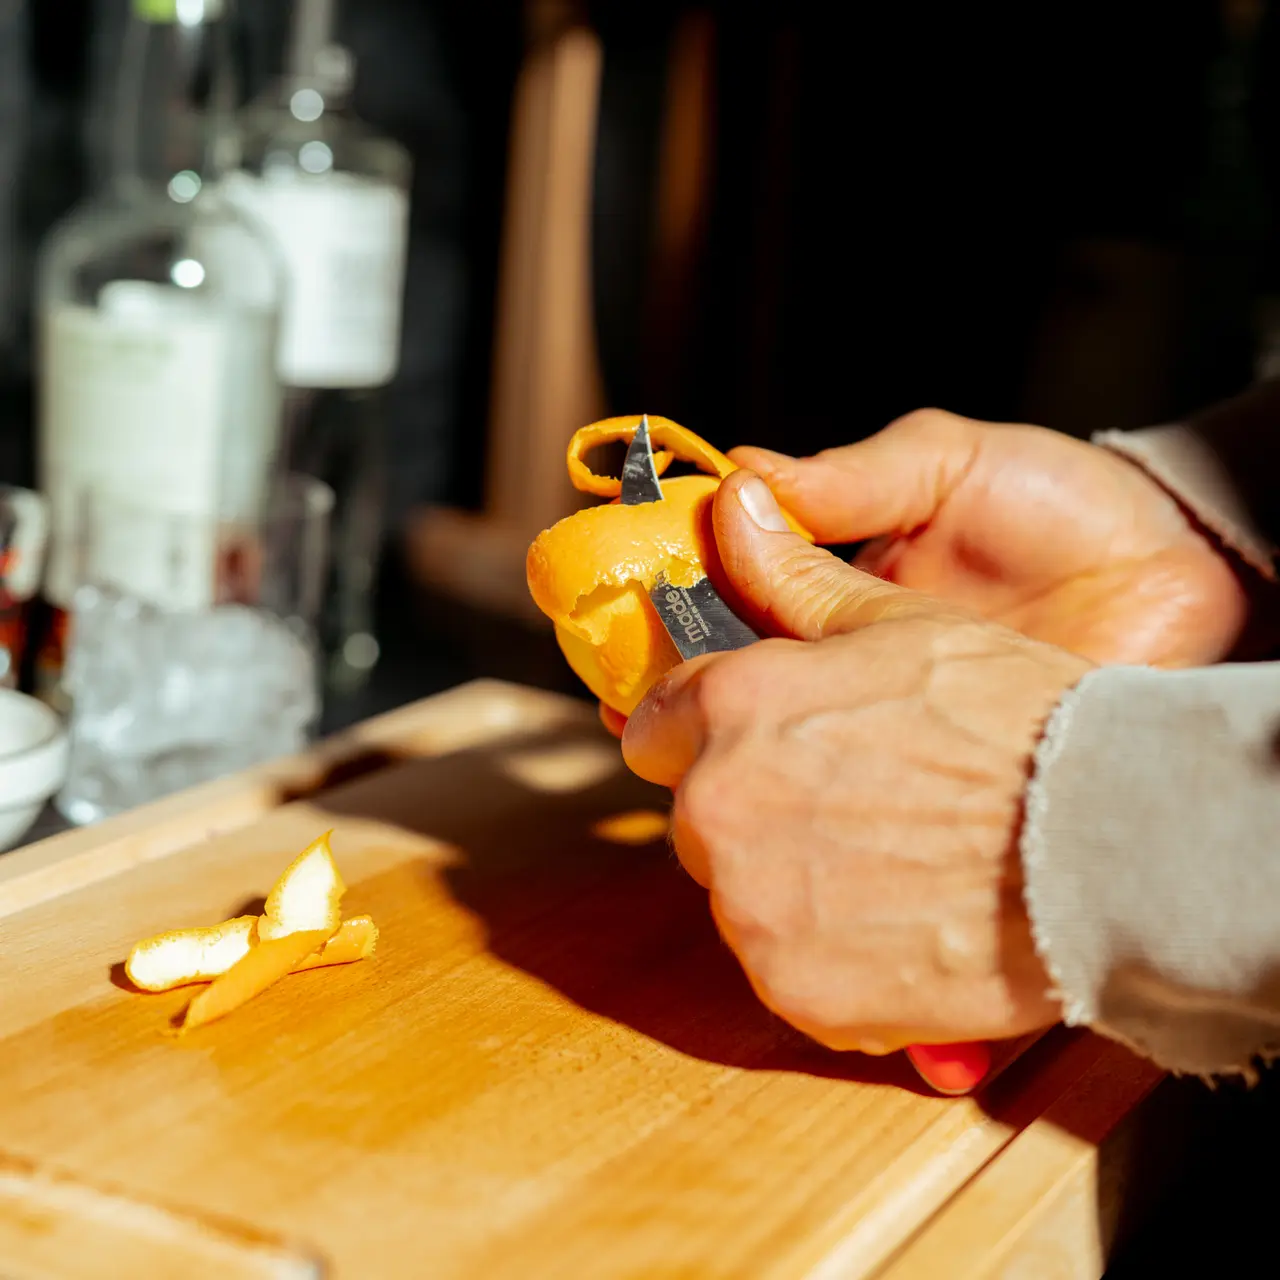 Hands peeling an orange with a knife on a wooden cutting board with peelings beside and bottles in the blurred background.